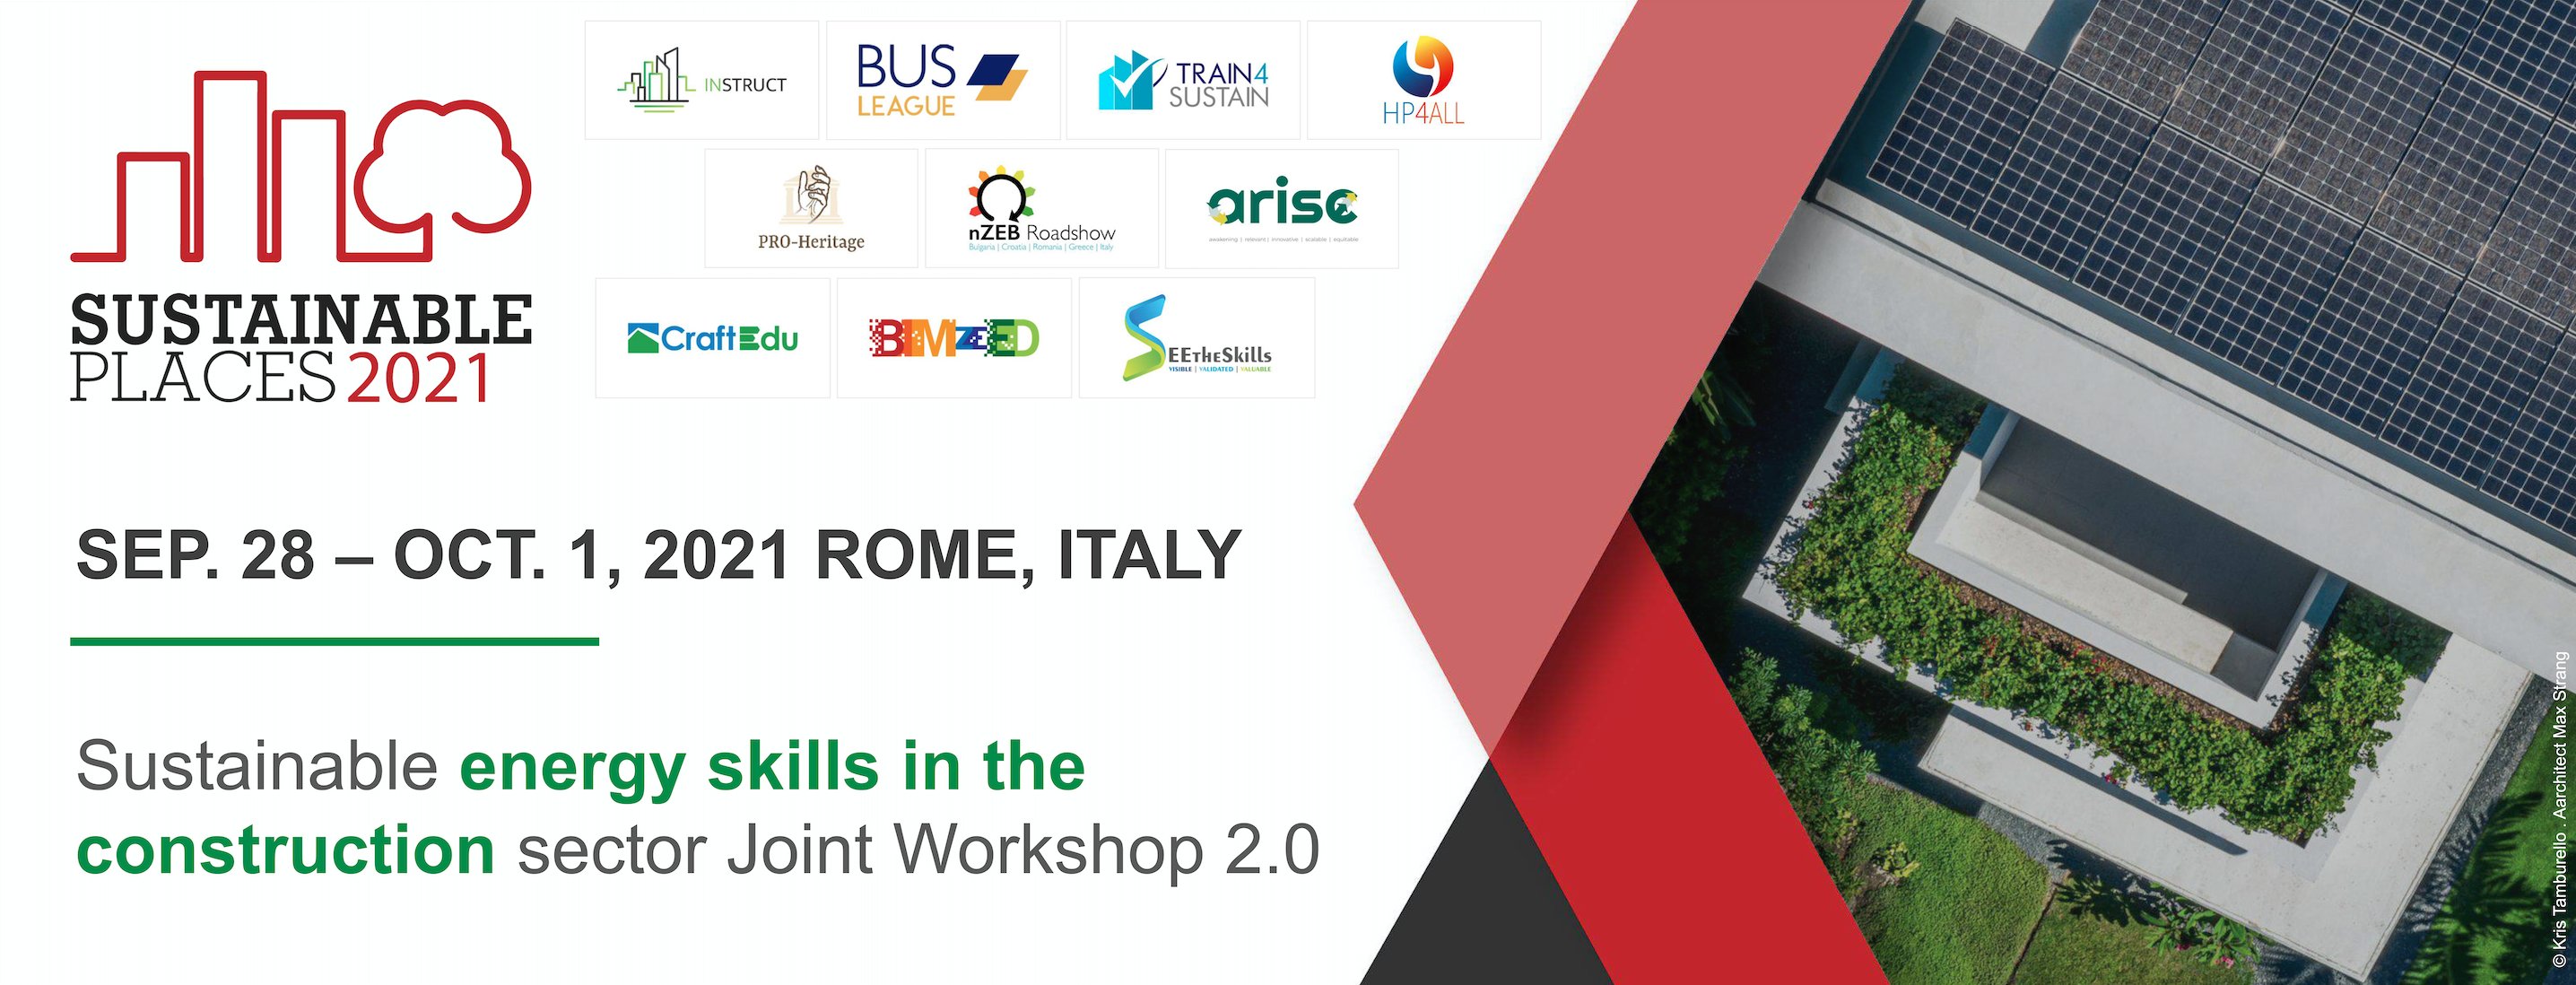 Workshop announcement: Sustainable Energy Skills in the Construction Sector 2.0